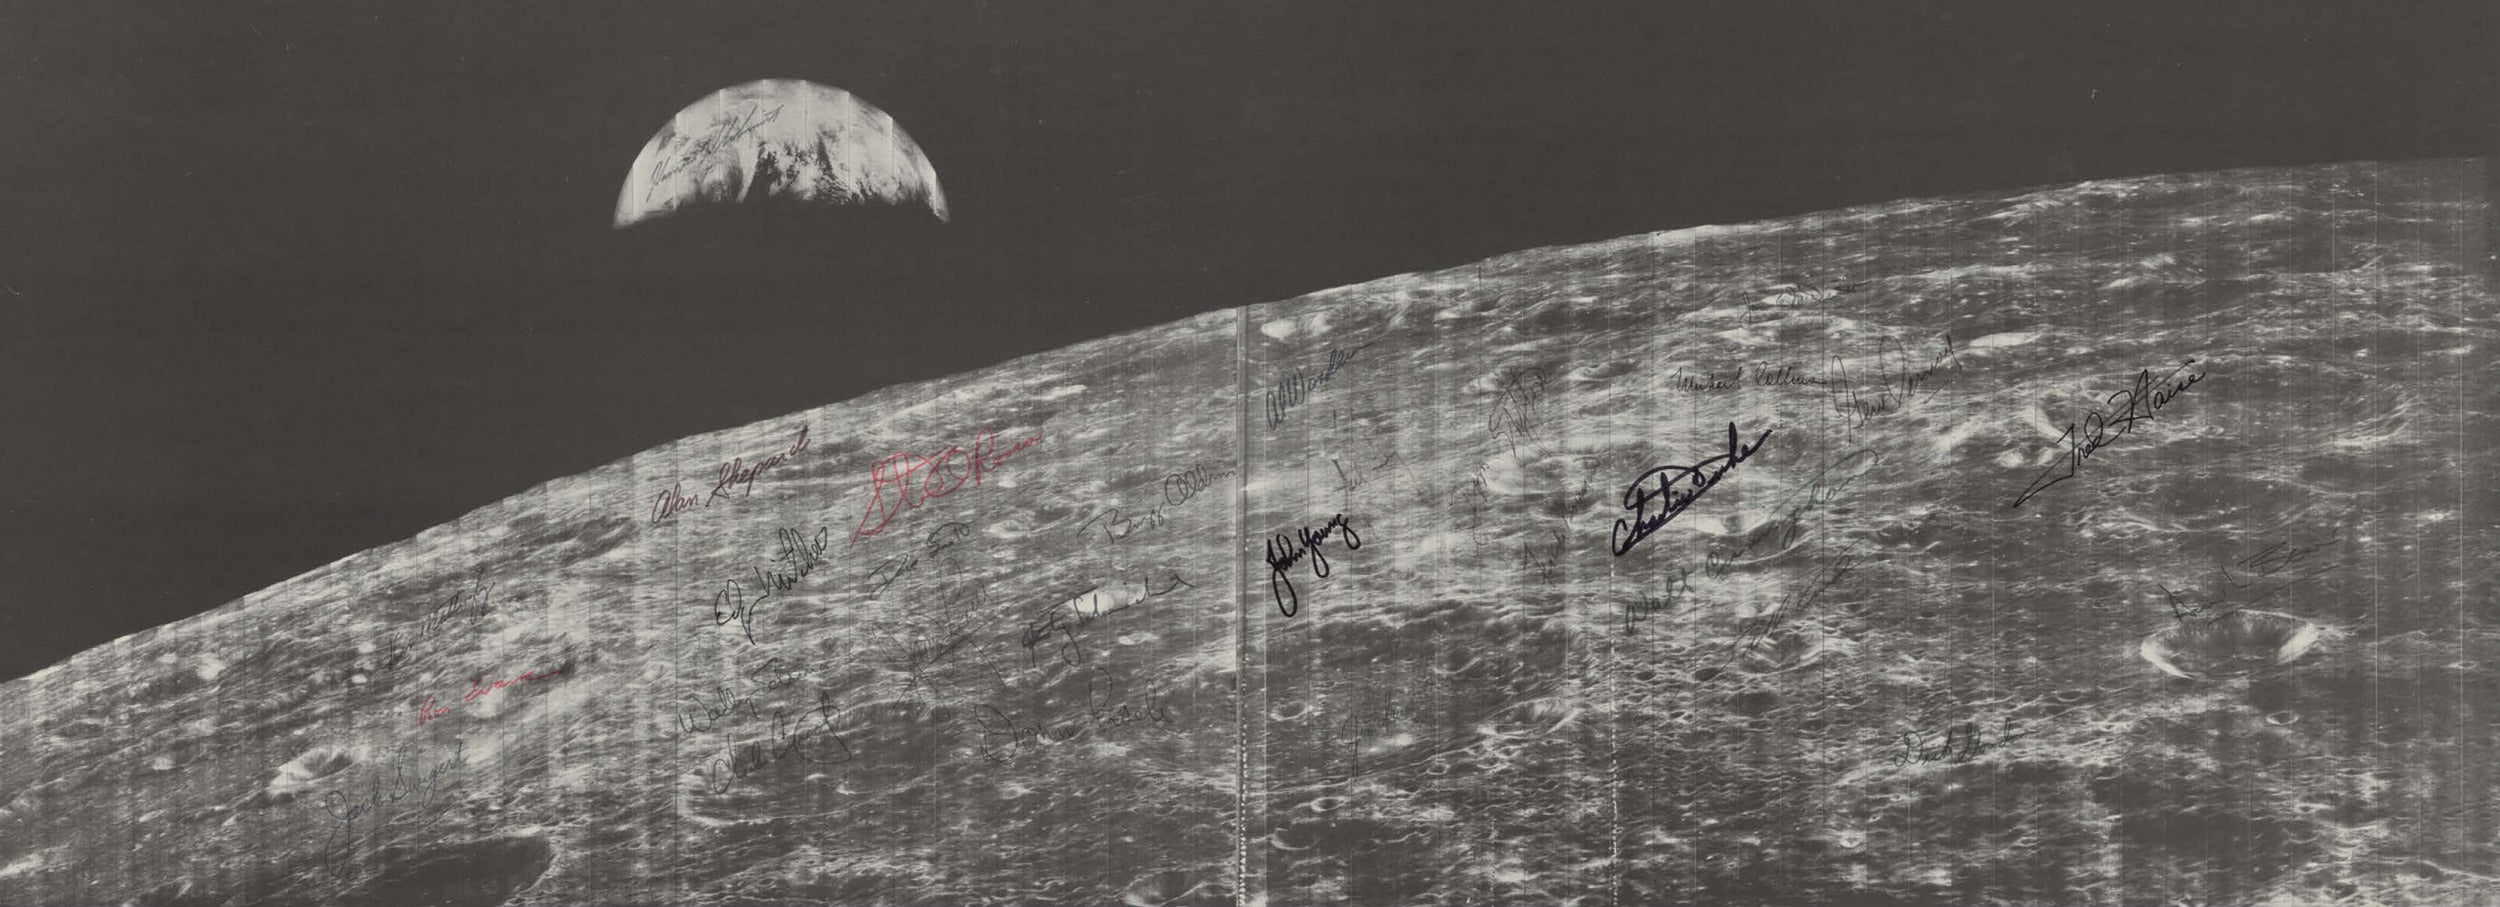 The first image of Earth from deep space, taken by Lunar Orbiter 1 on Aug. 23, 1966, signed by astronauts.